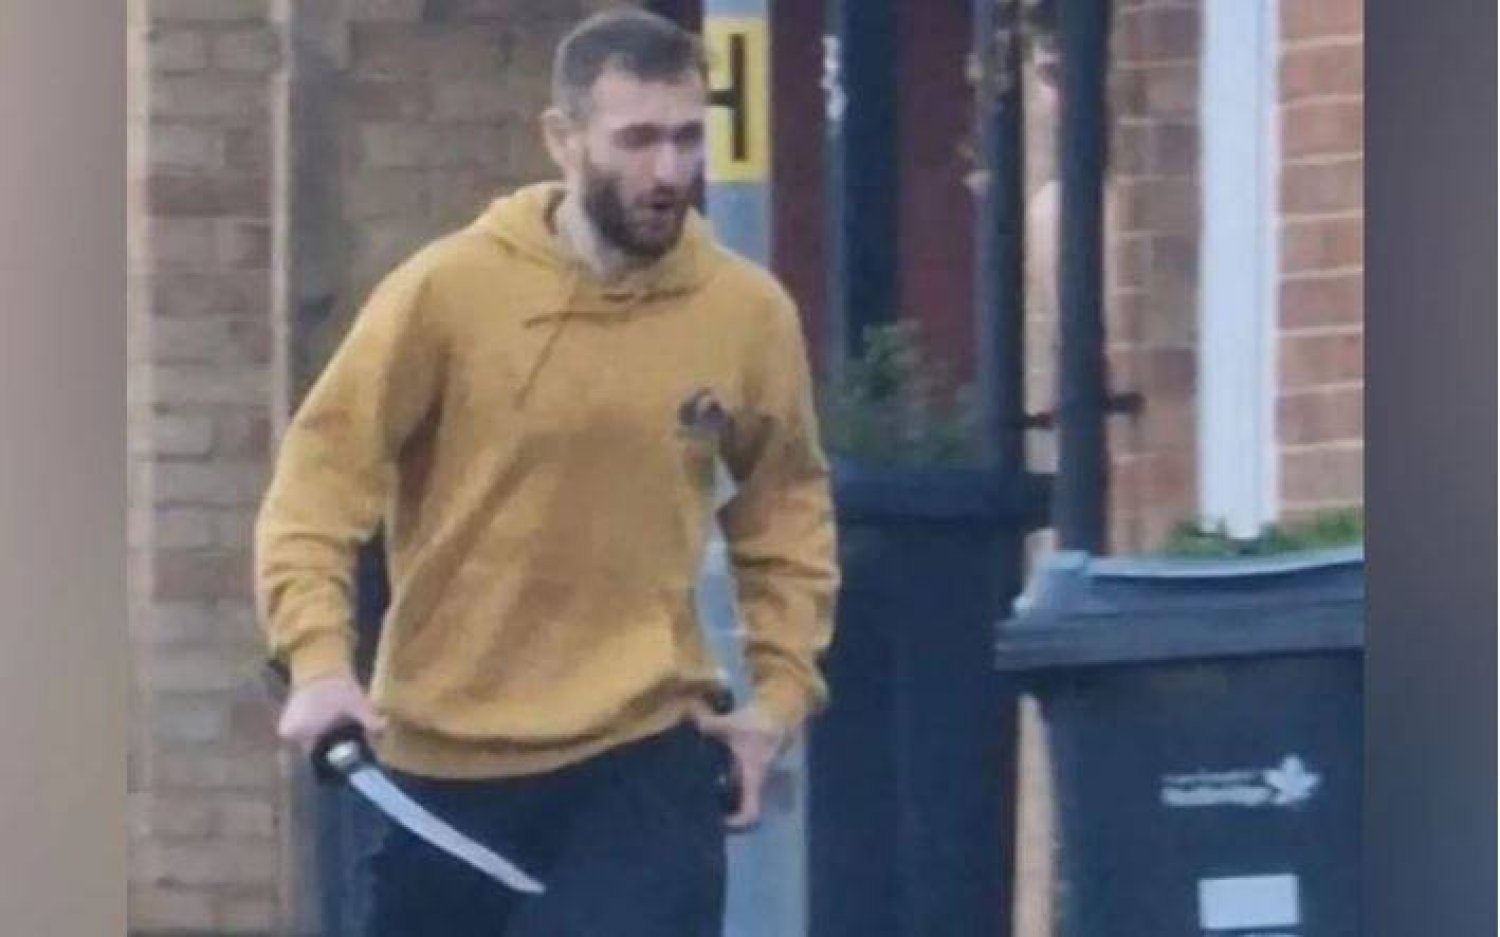 Footage posted on social media appears to show a man wearing a yellow hooded top carrying a large blade. (The Telegraph)